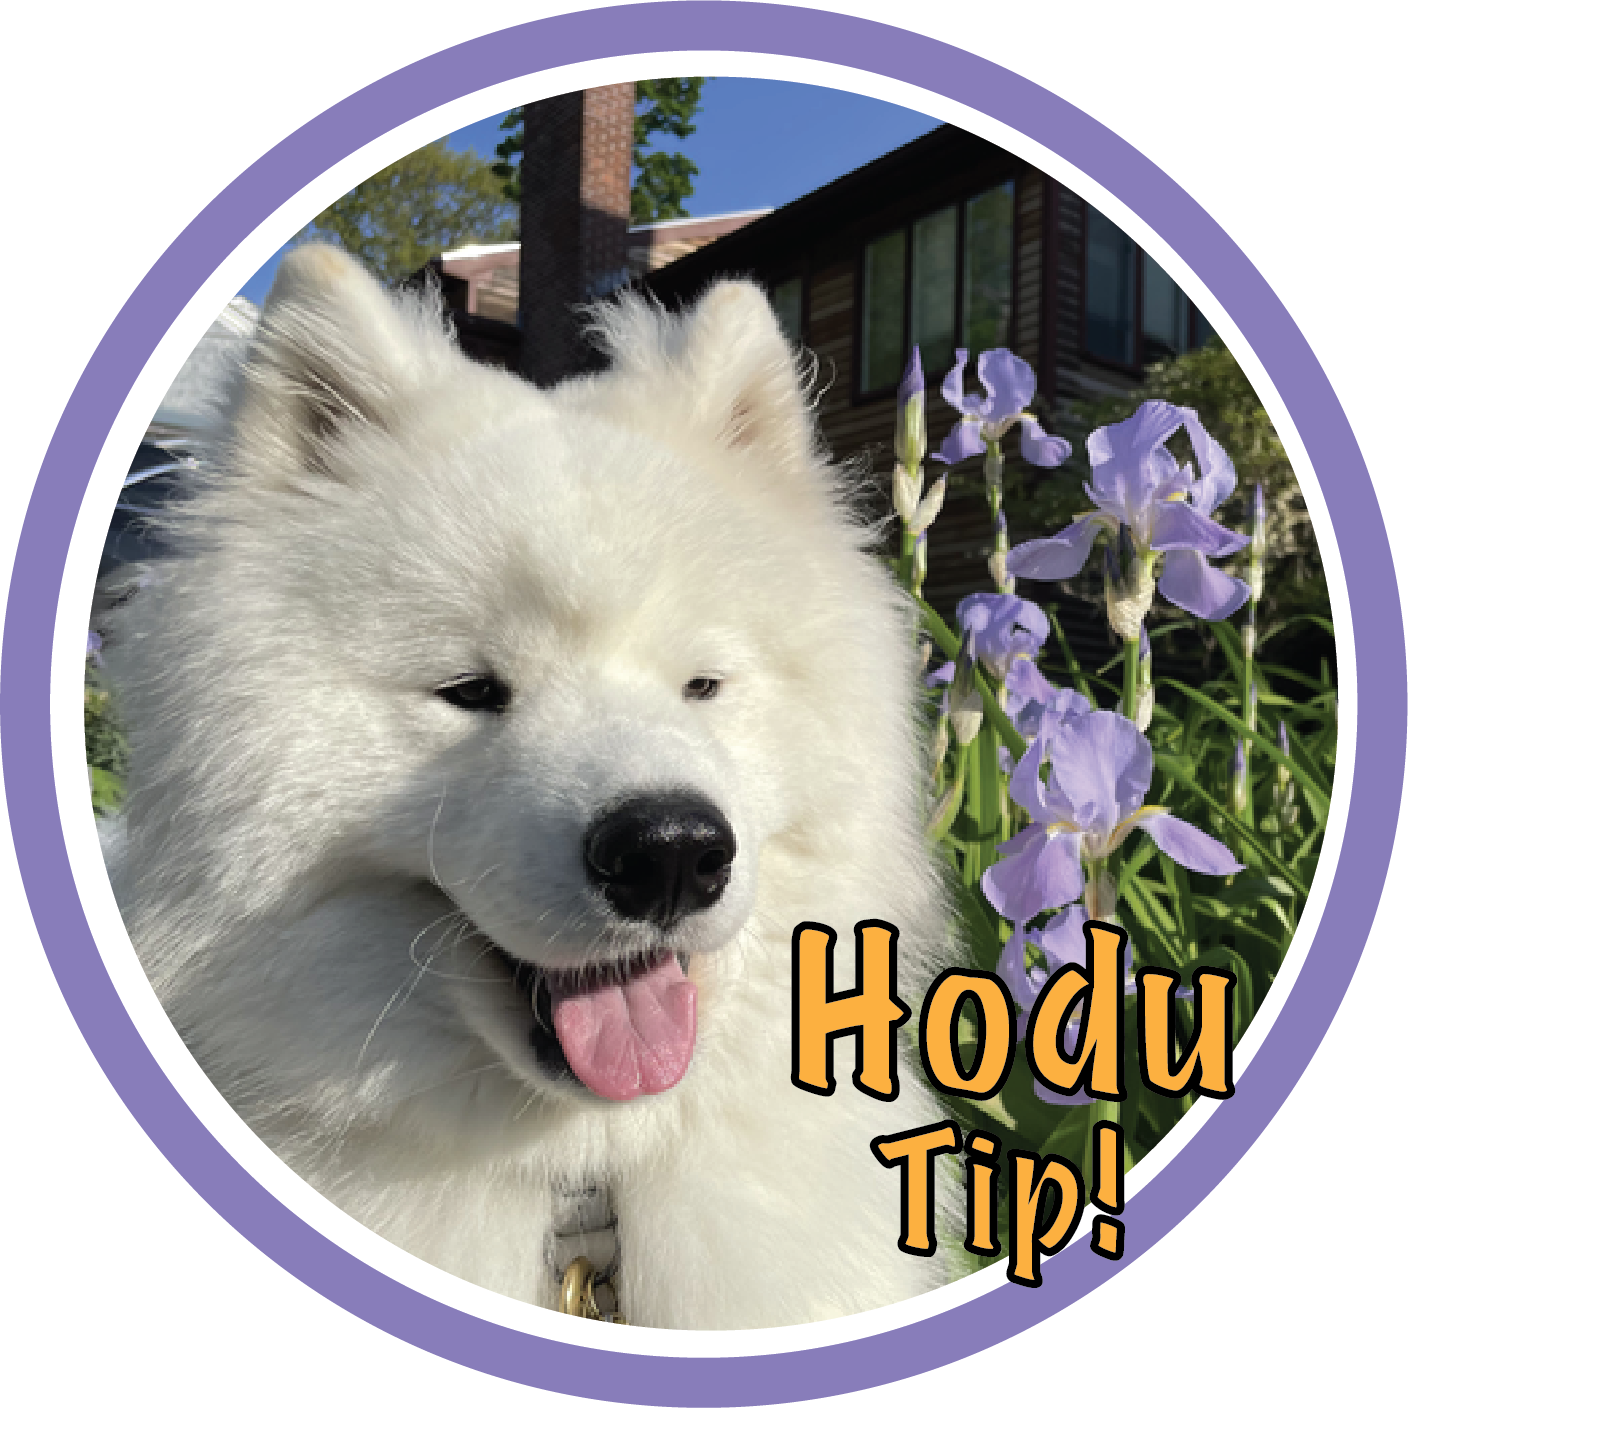 Hodu Tip! with lilac color styling